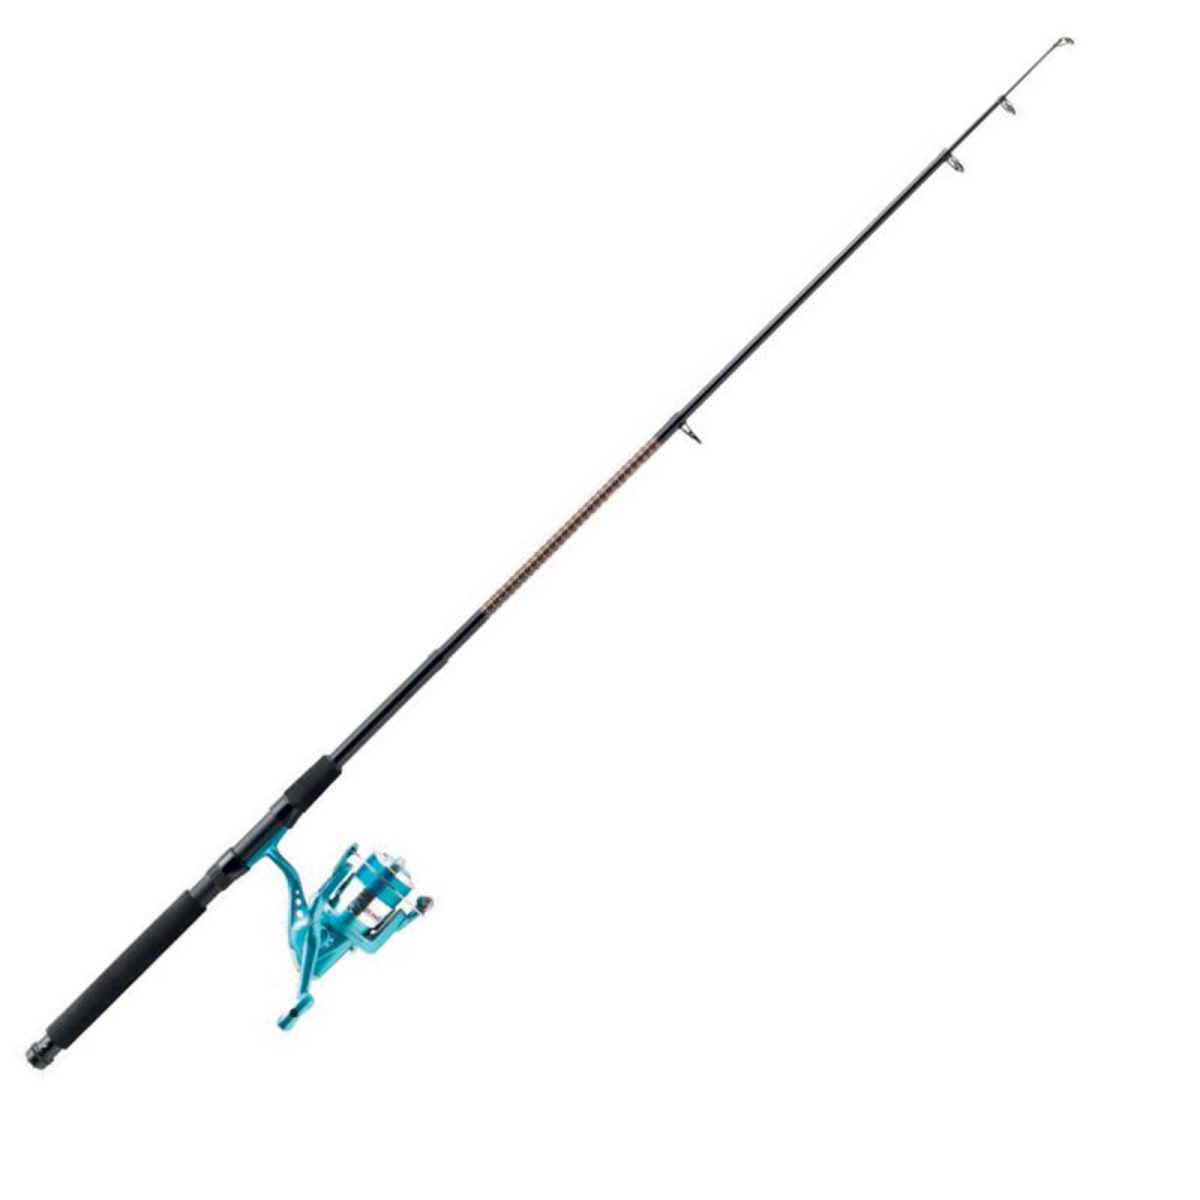 Mitchell GT Pro Spin Telescopic - 1.80 m - 5-20 g - Reel 2000 RD